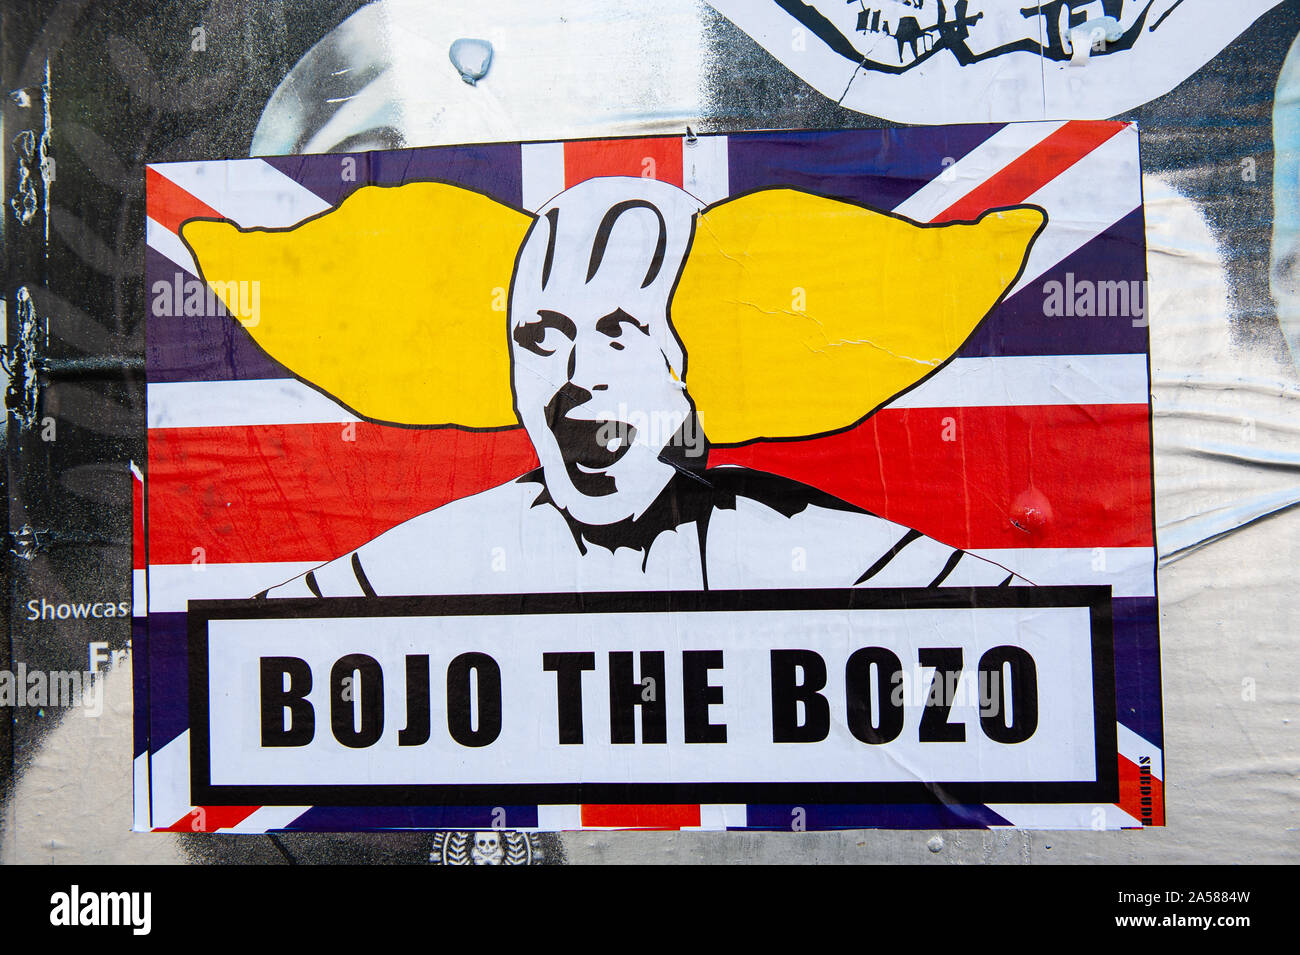 A paste up is seen showing Boris Johnson as a clown.As the Brexit deadline looms, new murals and paste-ups appear on the streets of London. Brick Lane, in London's east end, is one of the most popular places to find all kind of art around the Brexit. Also in the famous district of Shoreditch, tourists walk and take photos around this political street art. Stock Photo